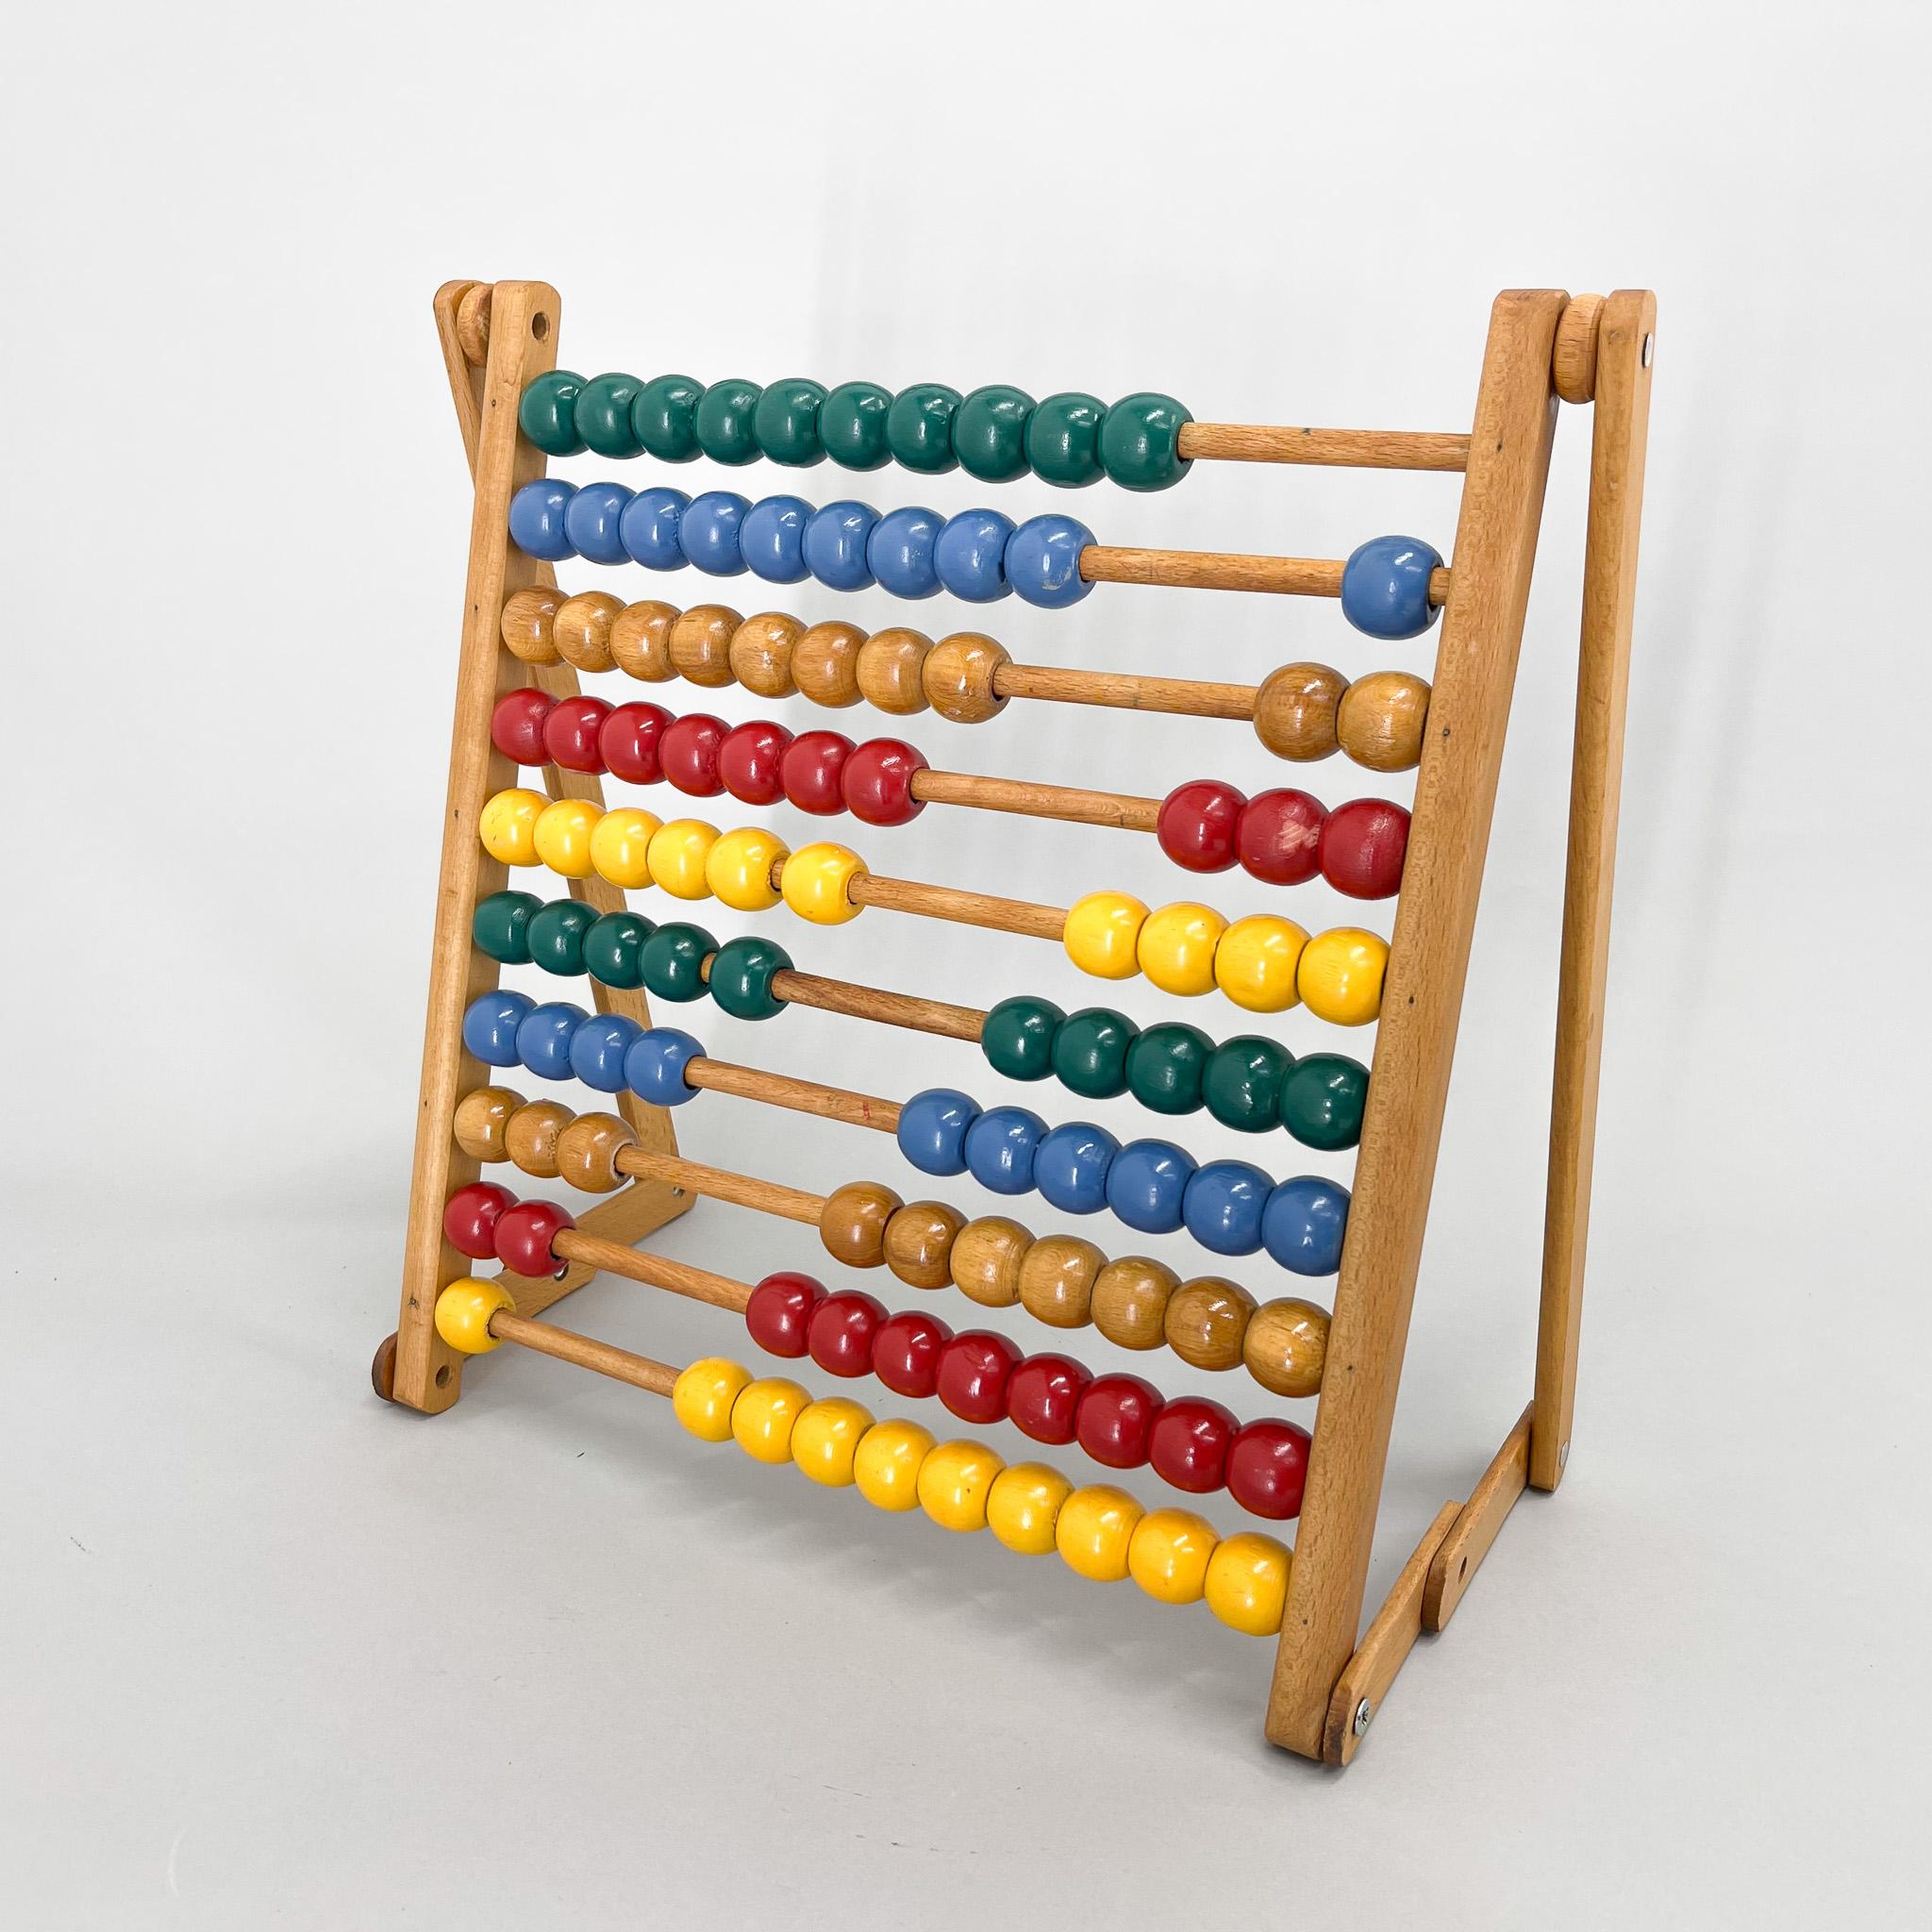 abacus meaning